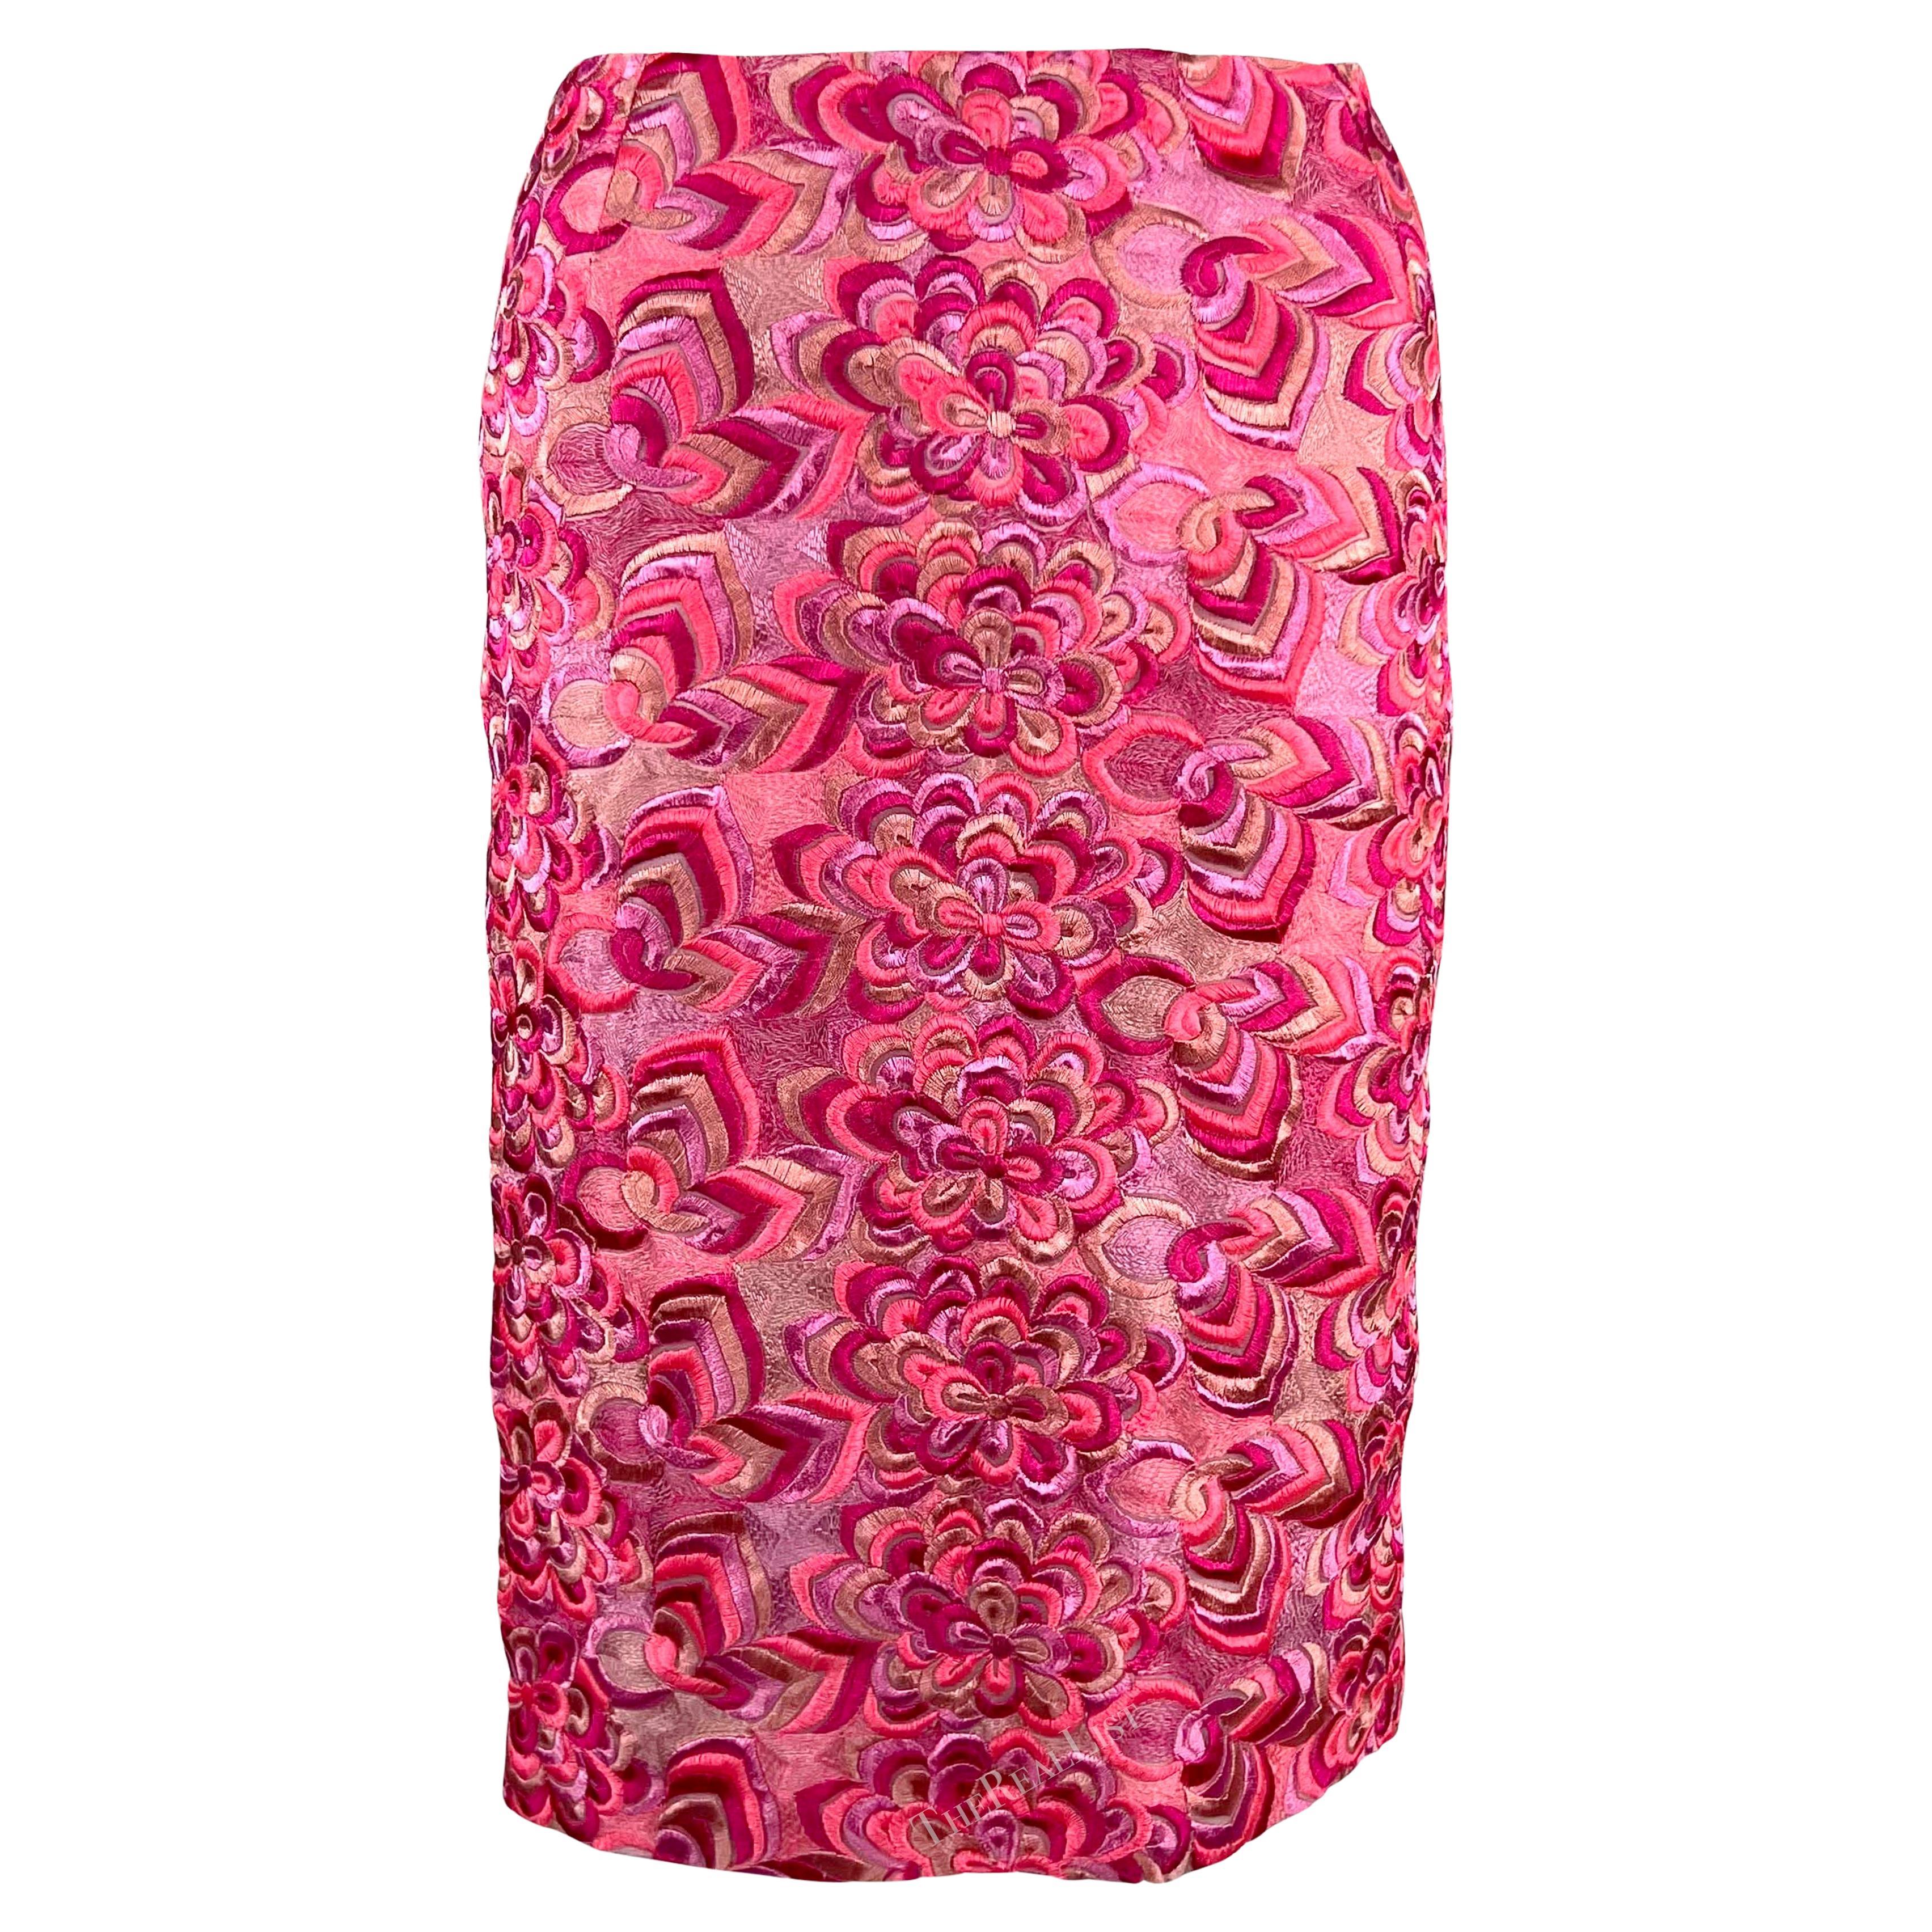 S/S 2000 Gianni Versace by Donatella Neon Pink Floral Embroidered Skirt For Sale